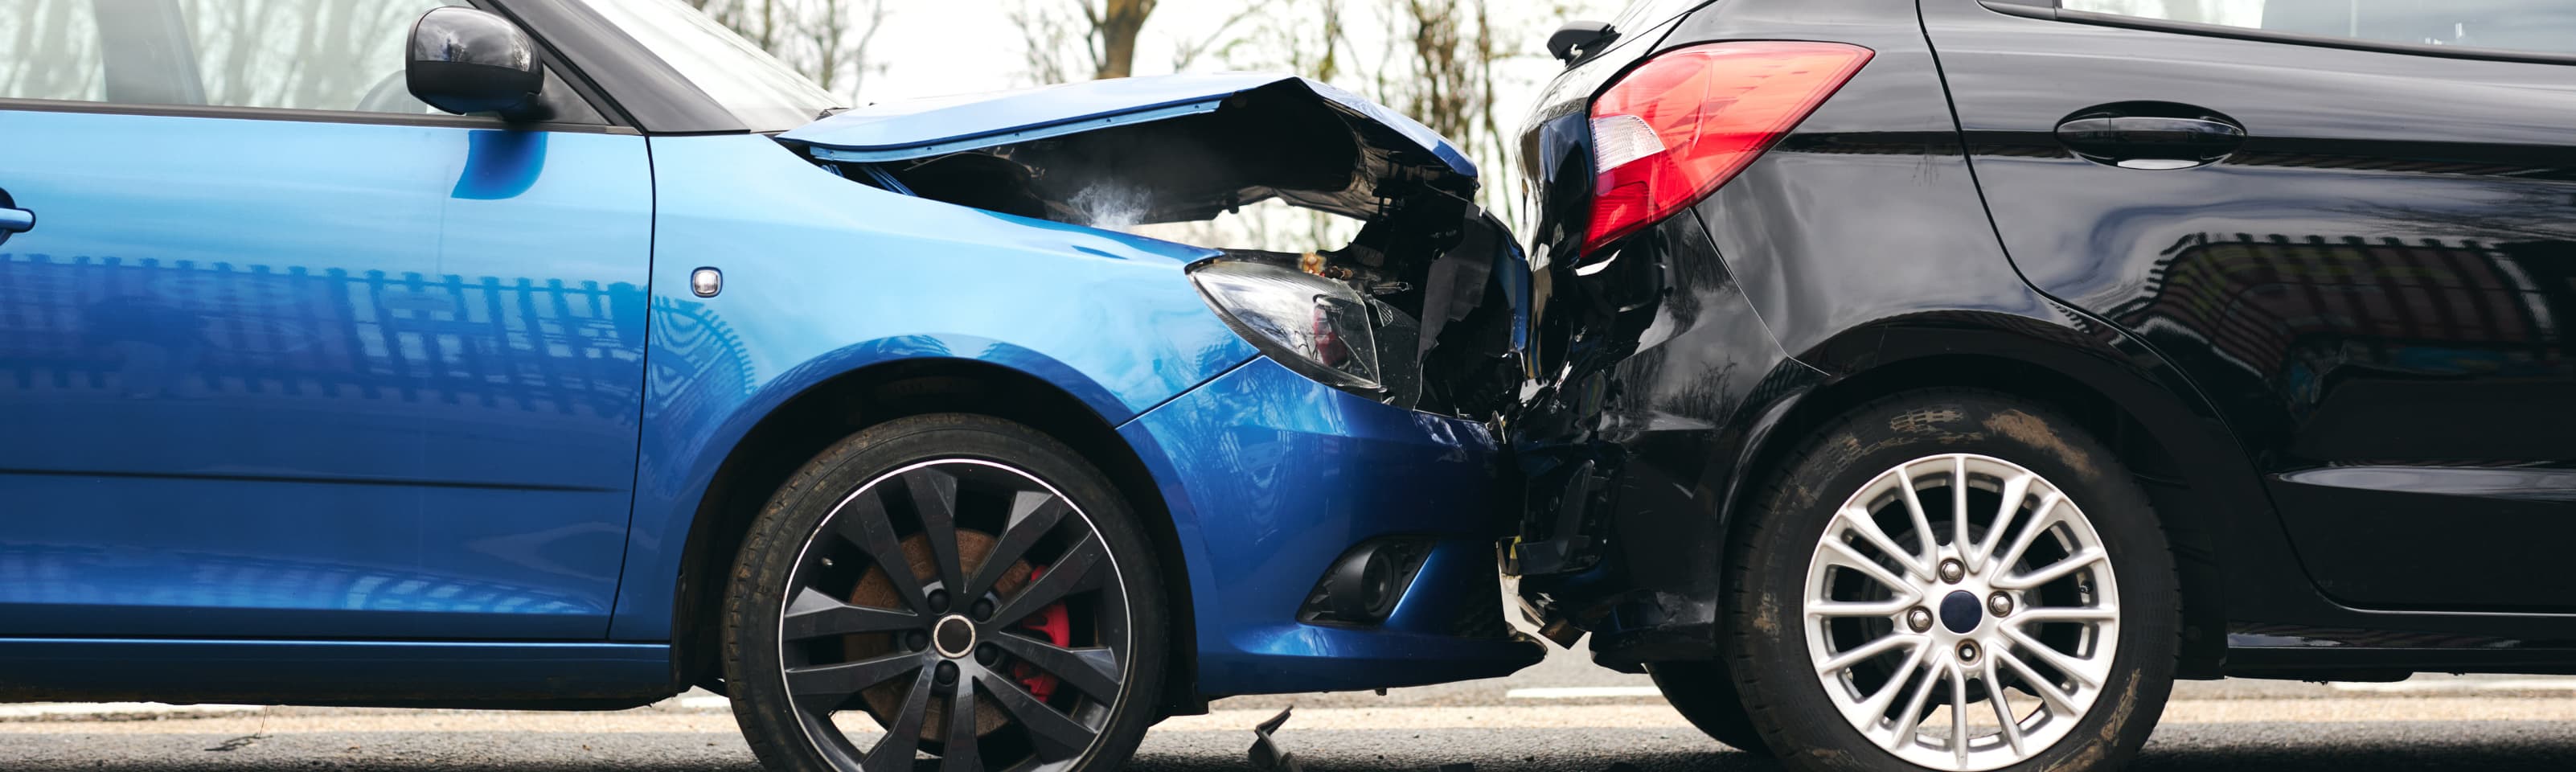 What’s the most likely time to have an accident?